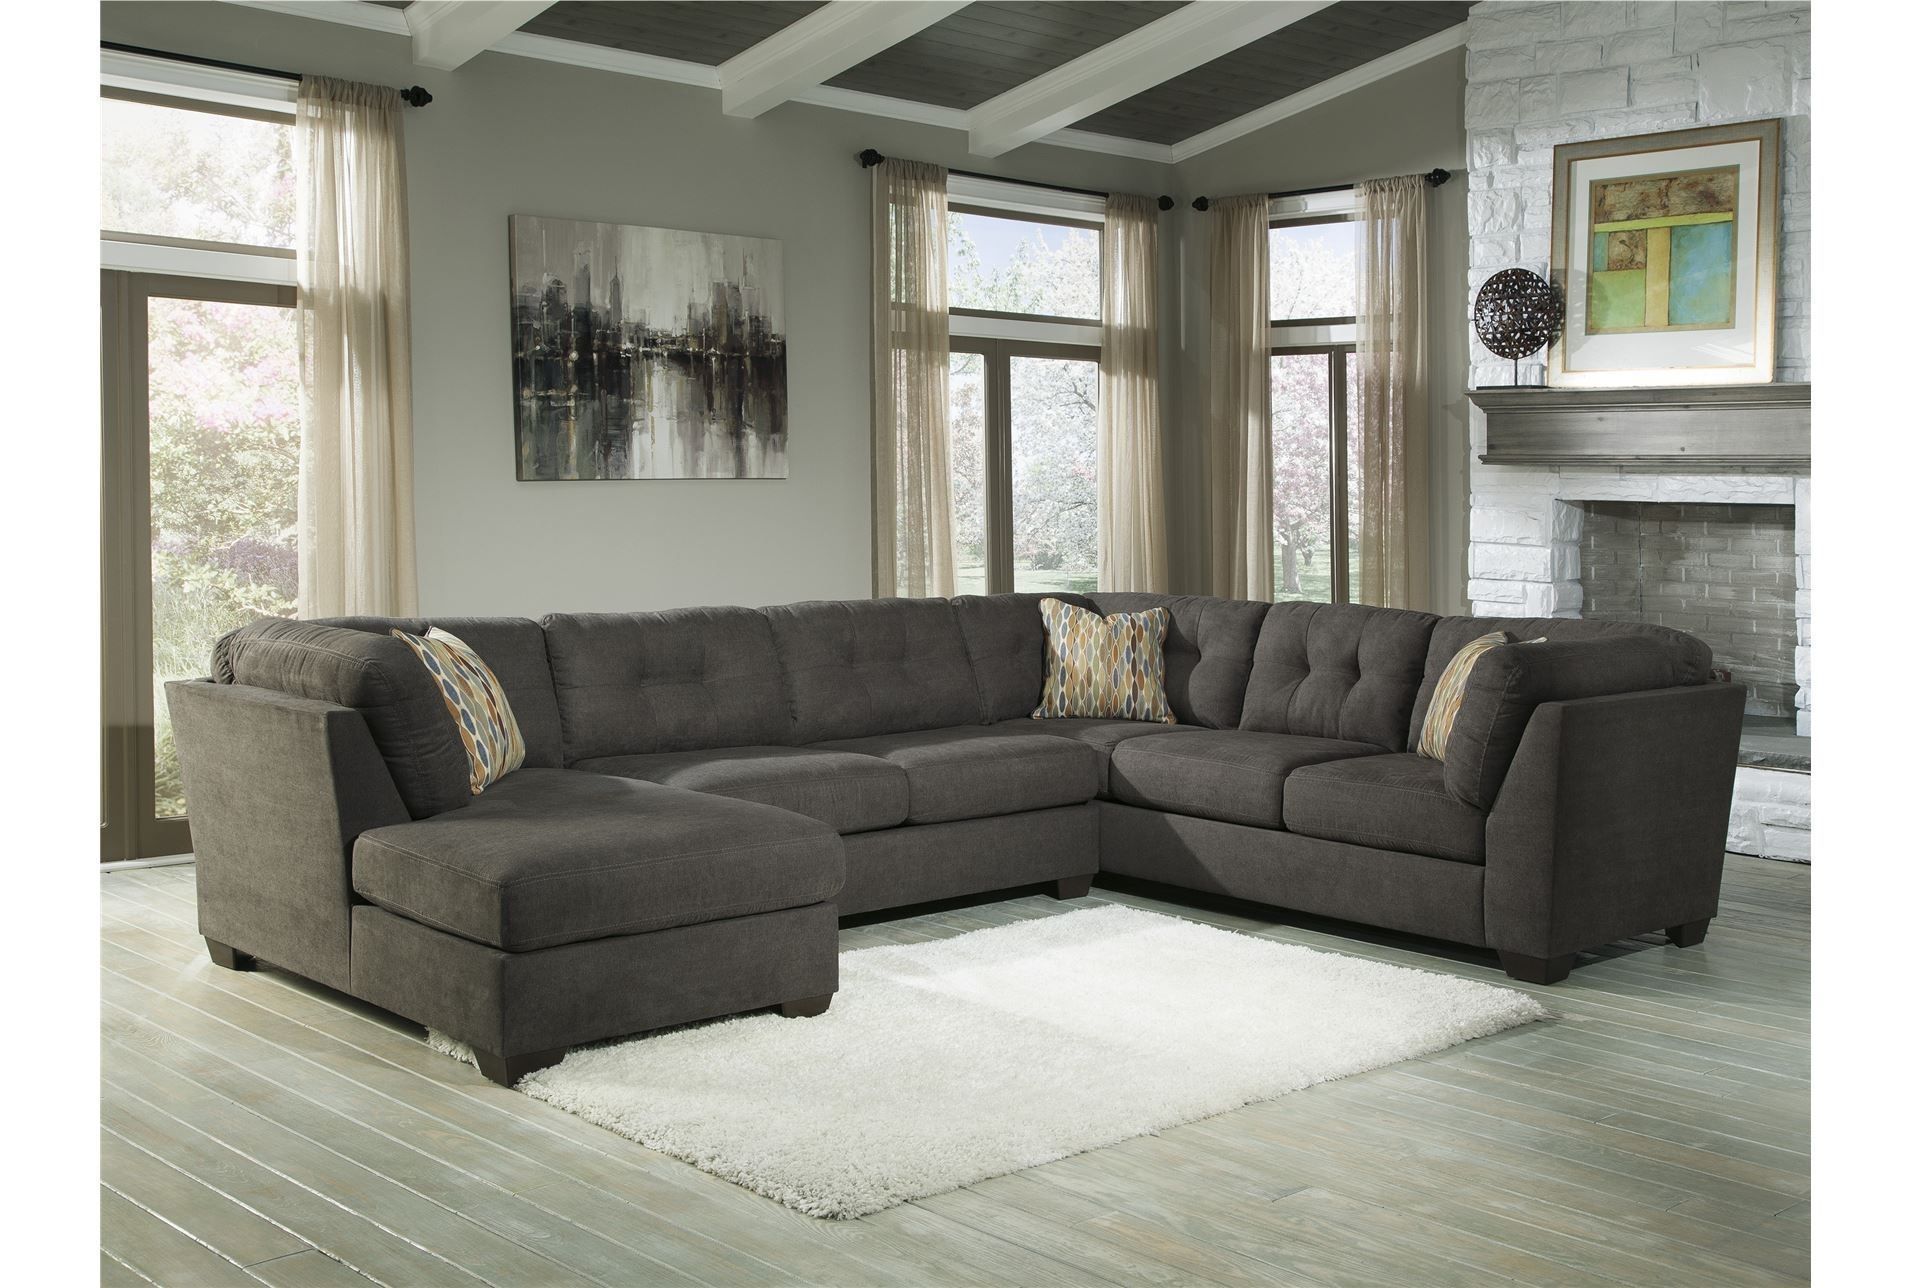 Delta City Steel 3 Piece Sectional W/laf Chaise  Living Room Option In Pensacola Fl Sectional Sofas (View 6 of 10)